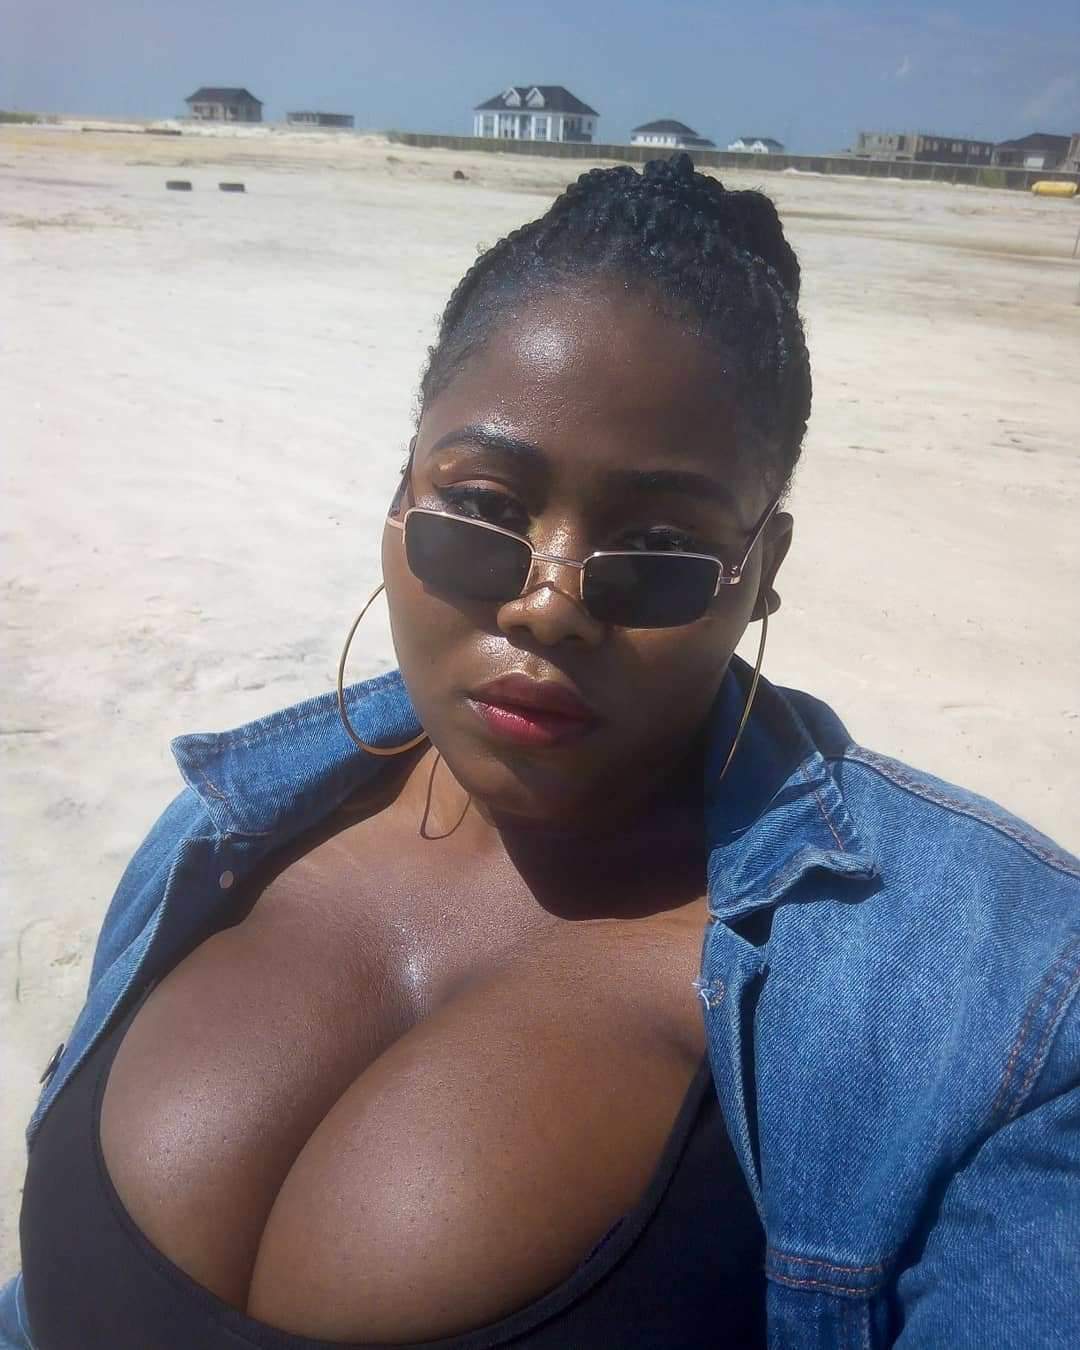 Nigerian Lady sets the internet on fire with her humongous bosoms (photos)